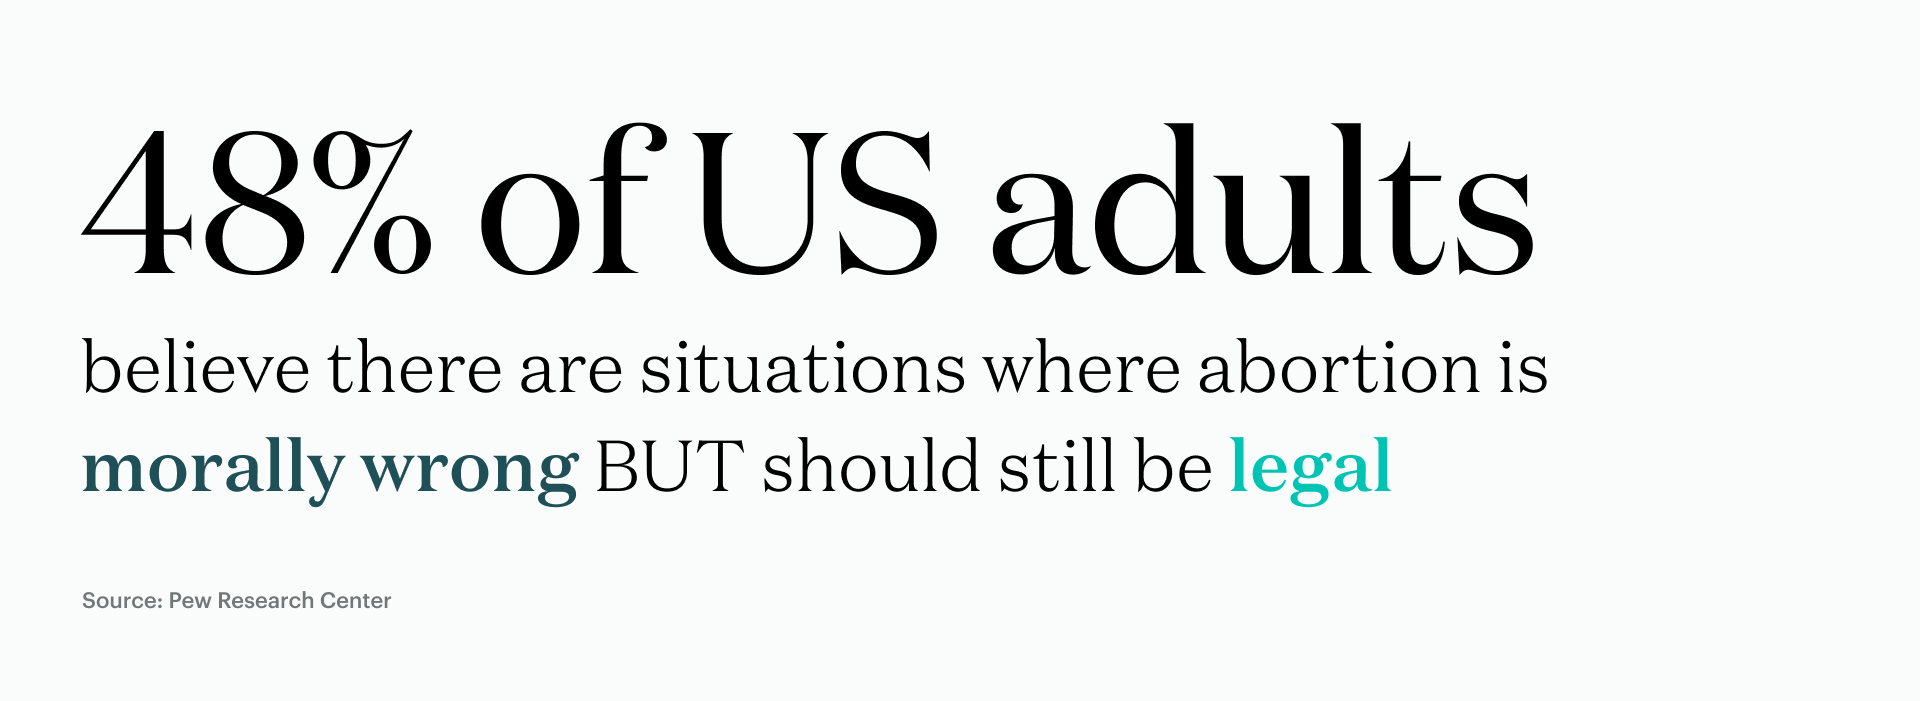 48% of US adults believe there are situations where abortion is morally wrong BUT should still be legal